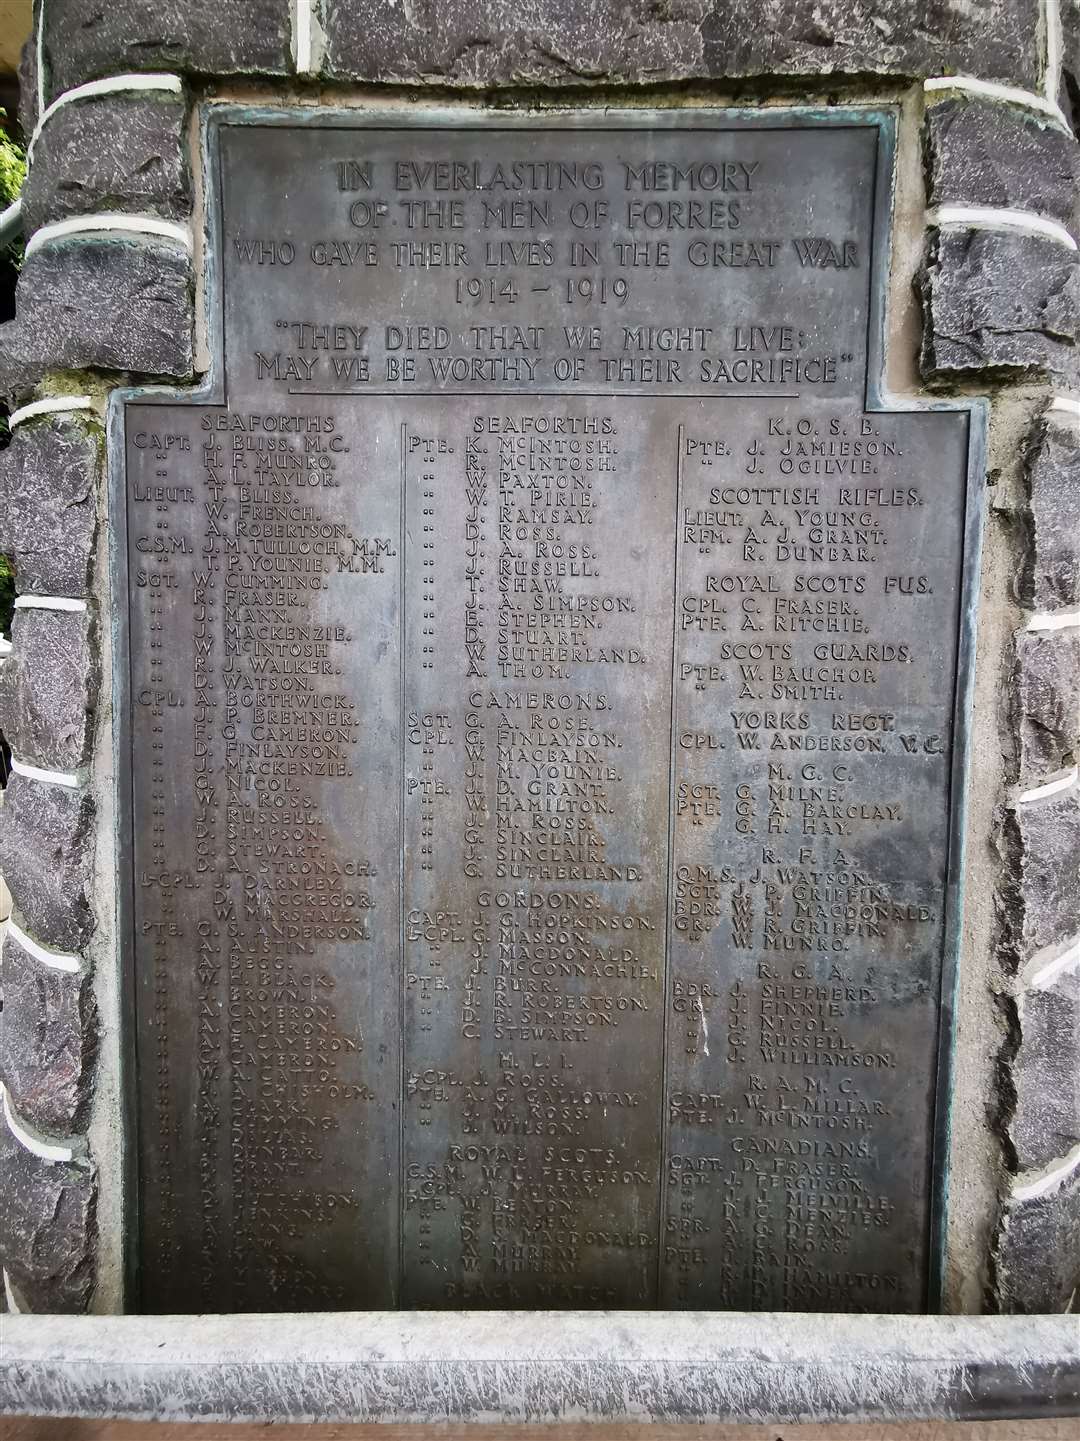 The Great War plaque at Forres War Memorial.